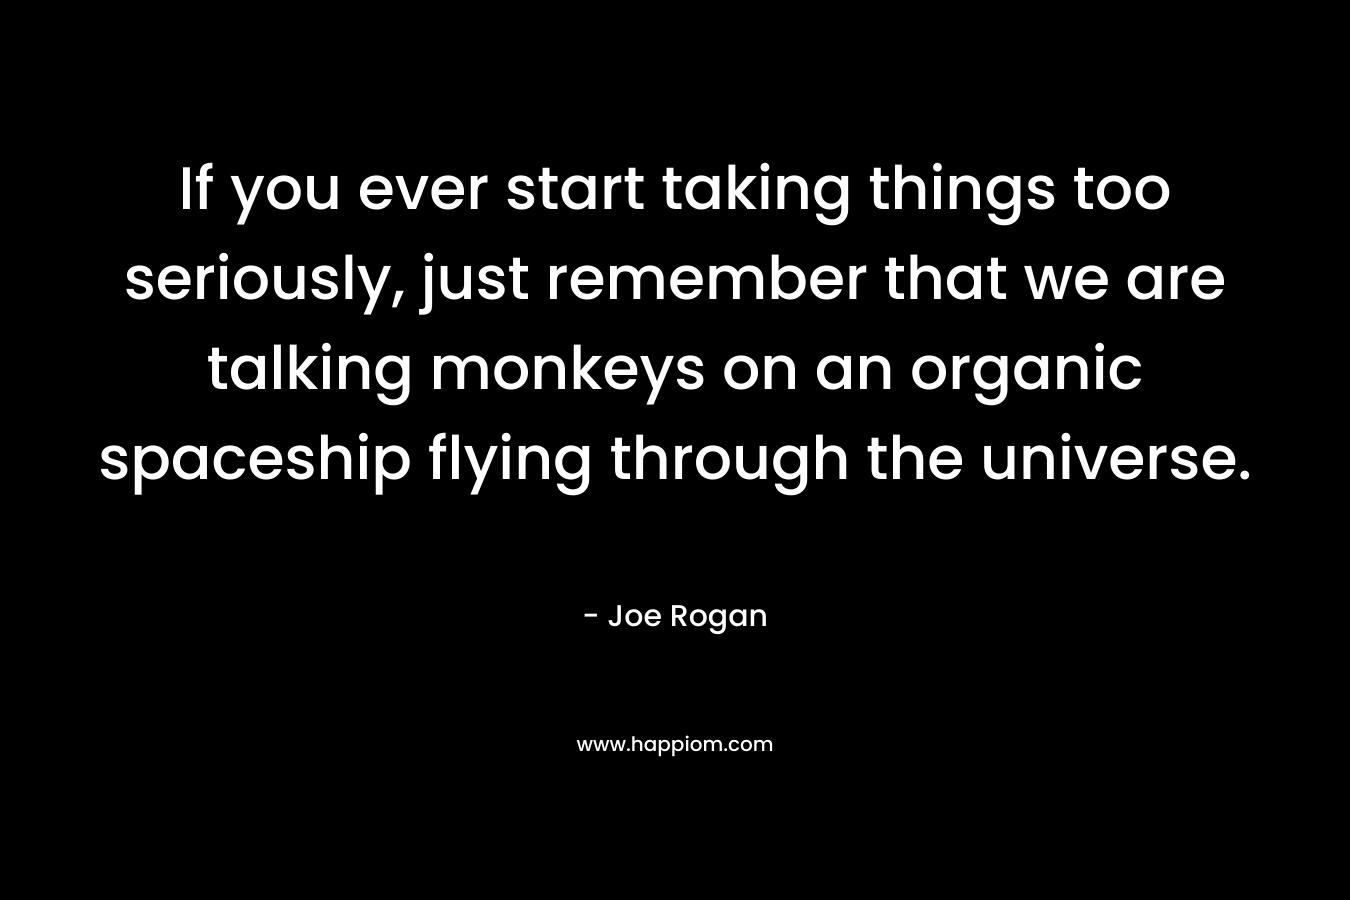 If you ever start taking things too seriously, just remember that we are talking monkeys on an organic spaceship flying through the universe. – Joe Rogan